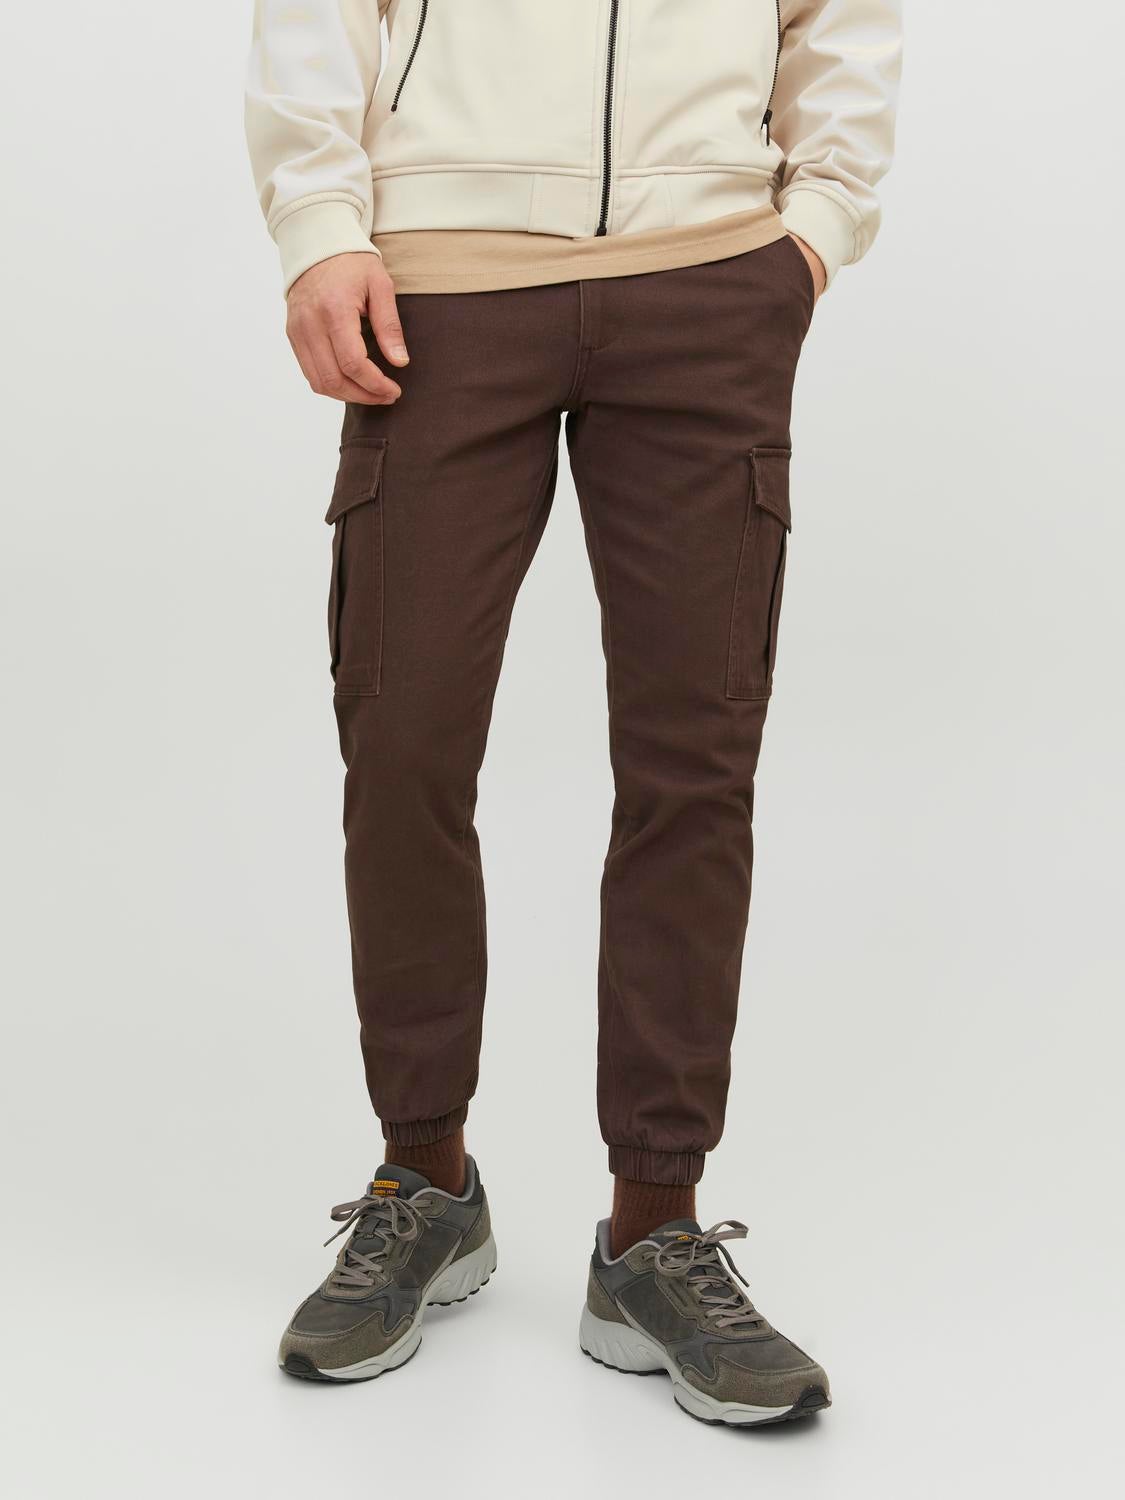 M.o.k Trench Cargo Pant in Brown | Red Rat